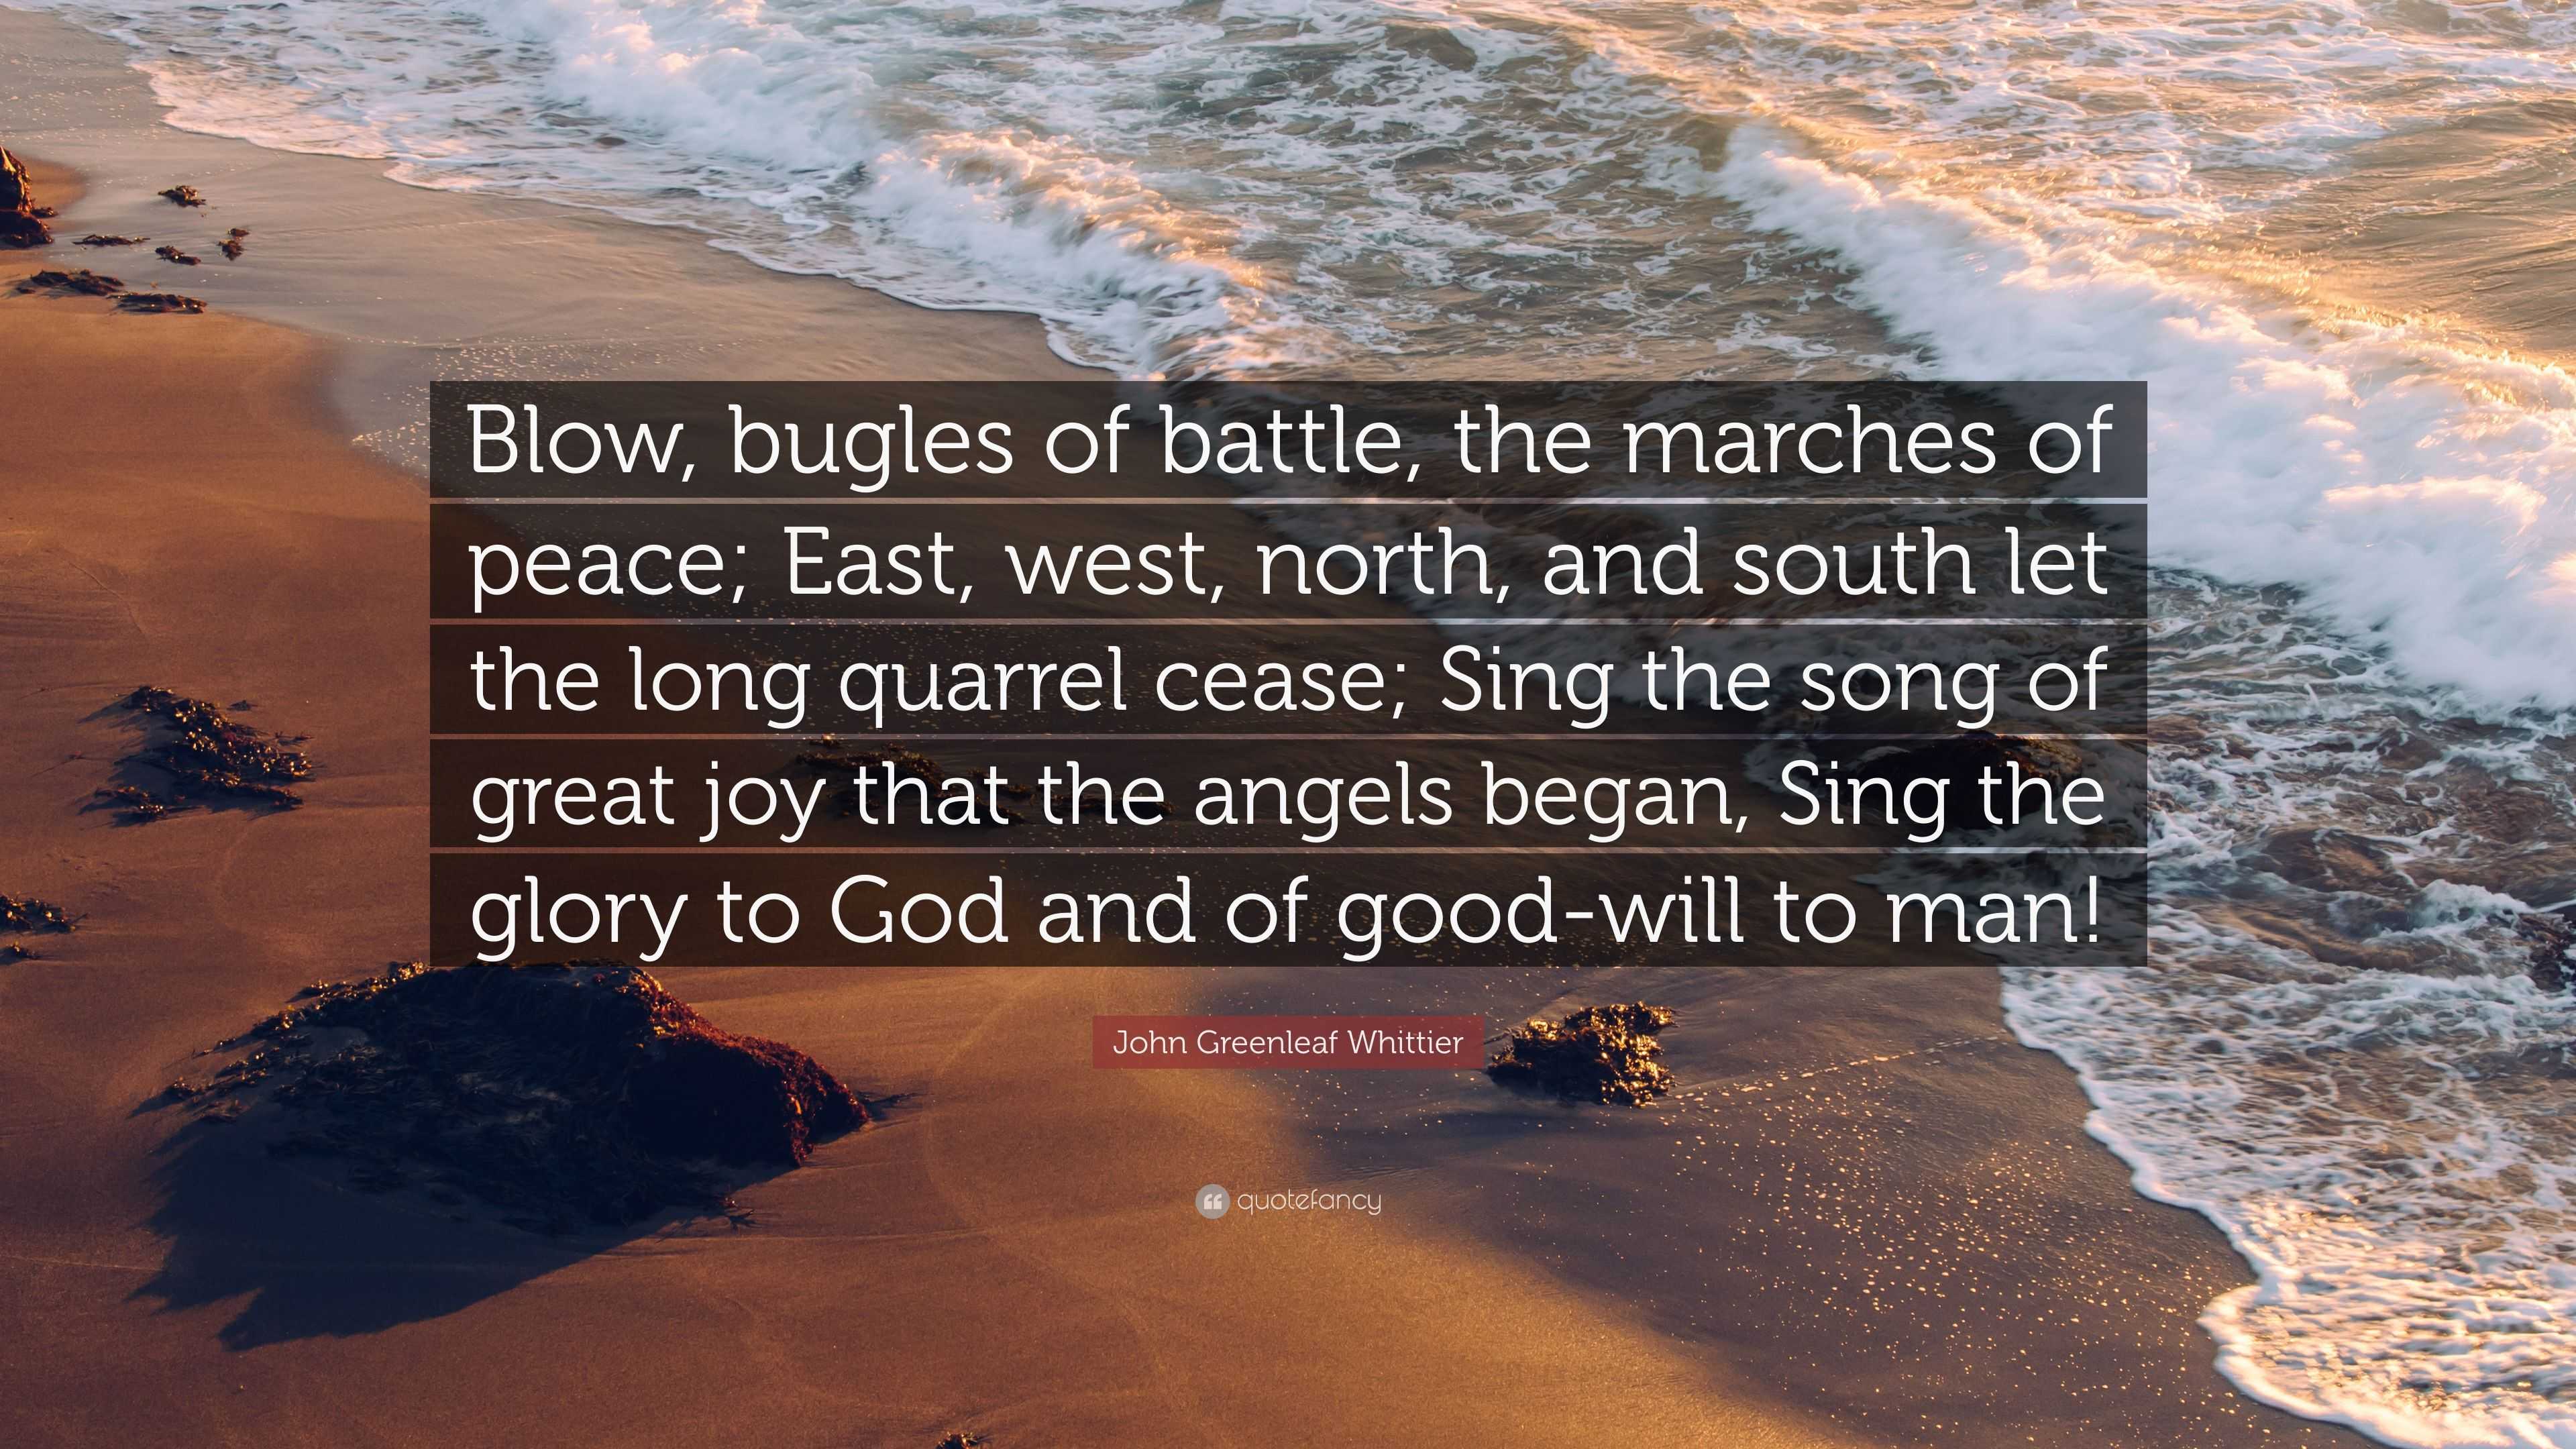 John Greenleaf Whittier Quote: “Blow, bugles of battle, the marches of  peace; East, west, north, and south let the long quarrel cease; Sing the  song of ...”